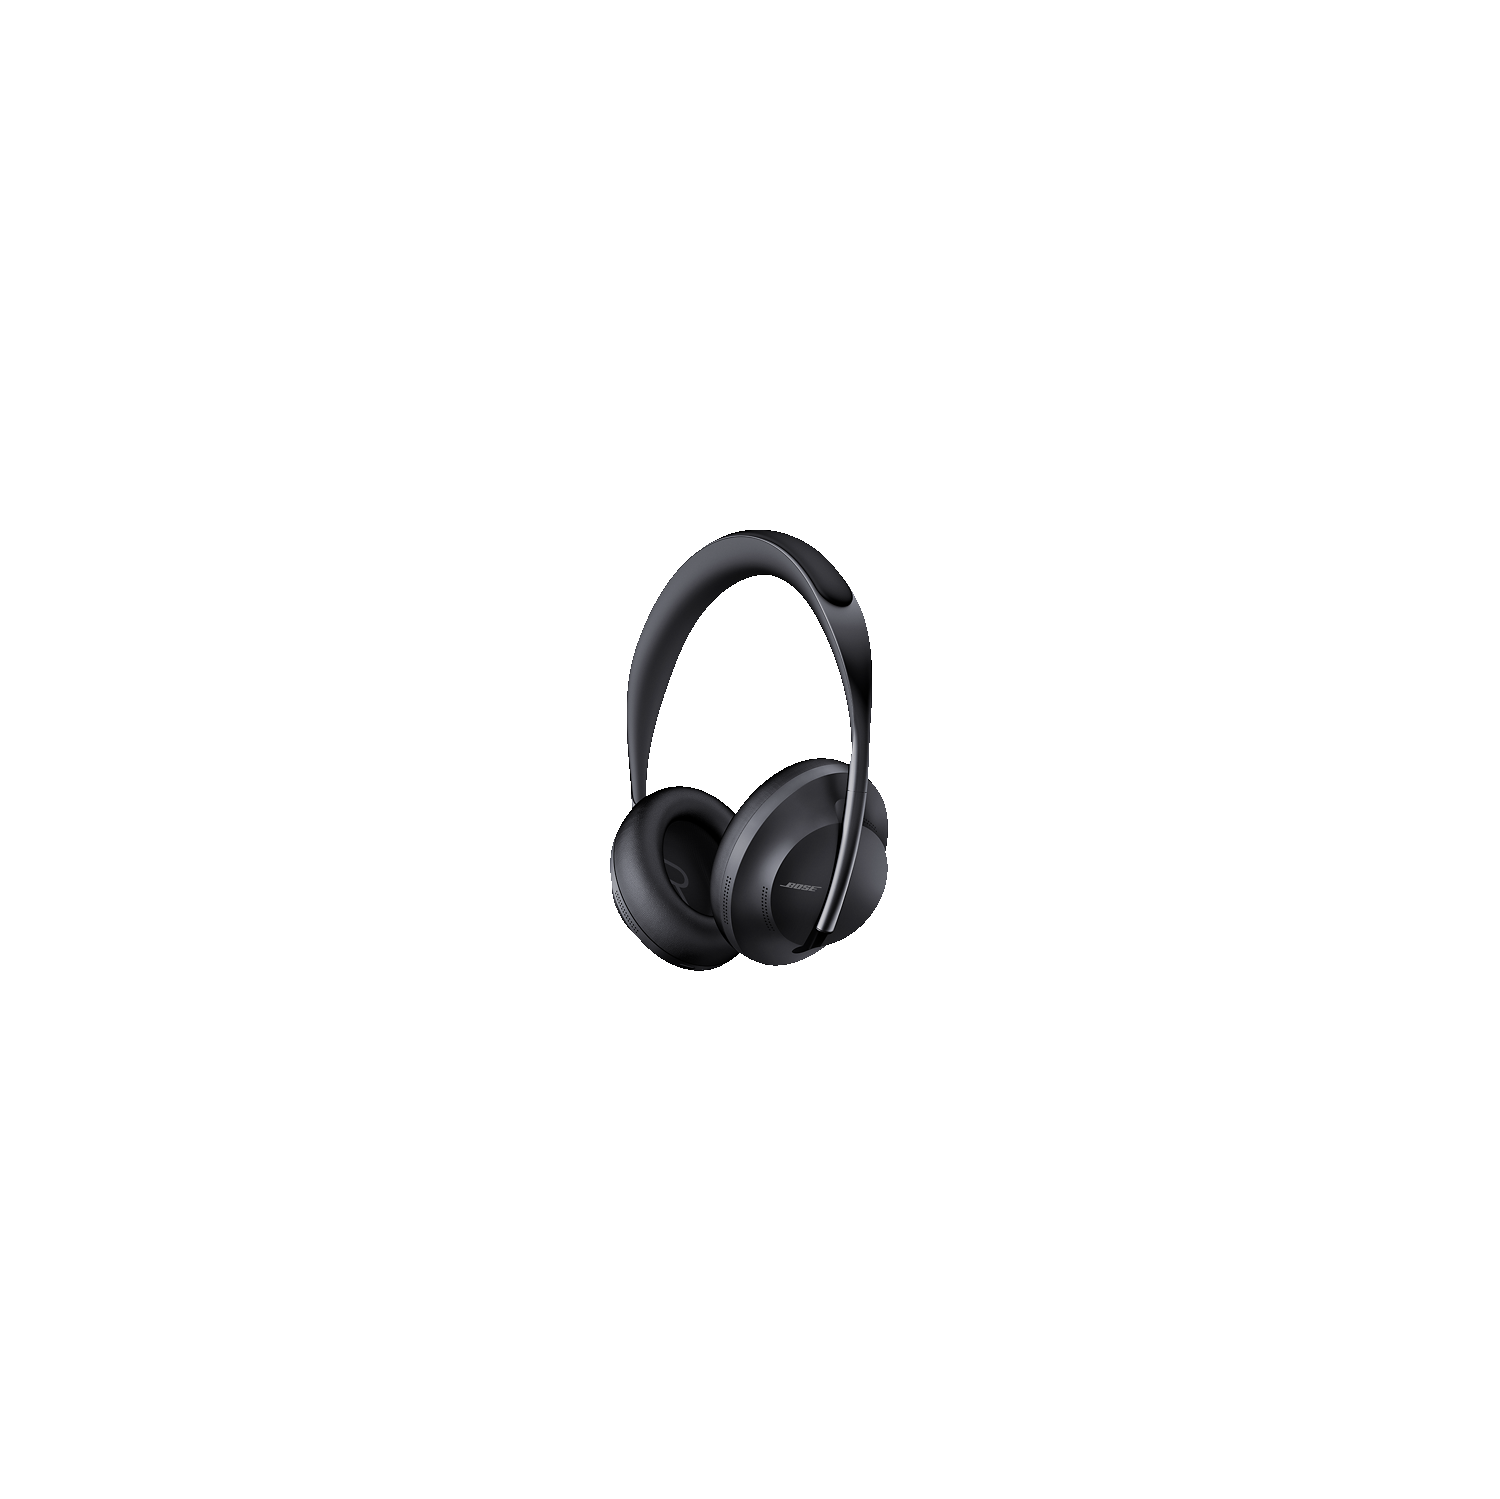 Bose Noise Cancelling Bluetooth Headphones 700 with Google Assistant and Amazon Alexa - Triple Black (Open Boxed)